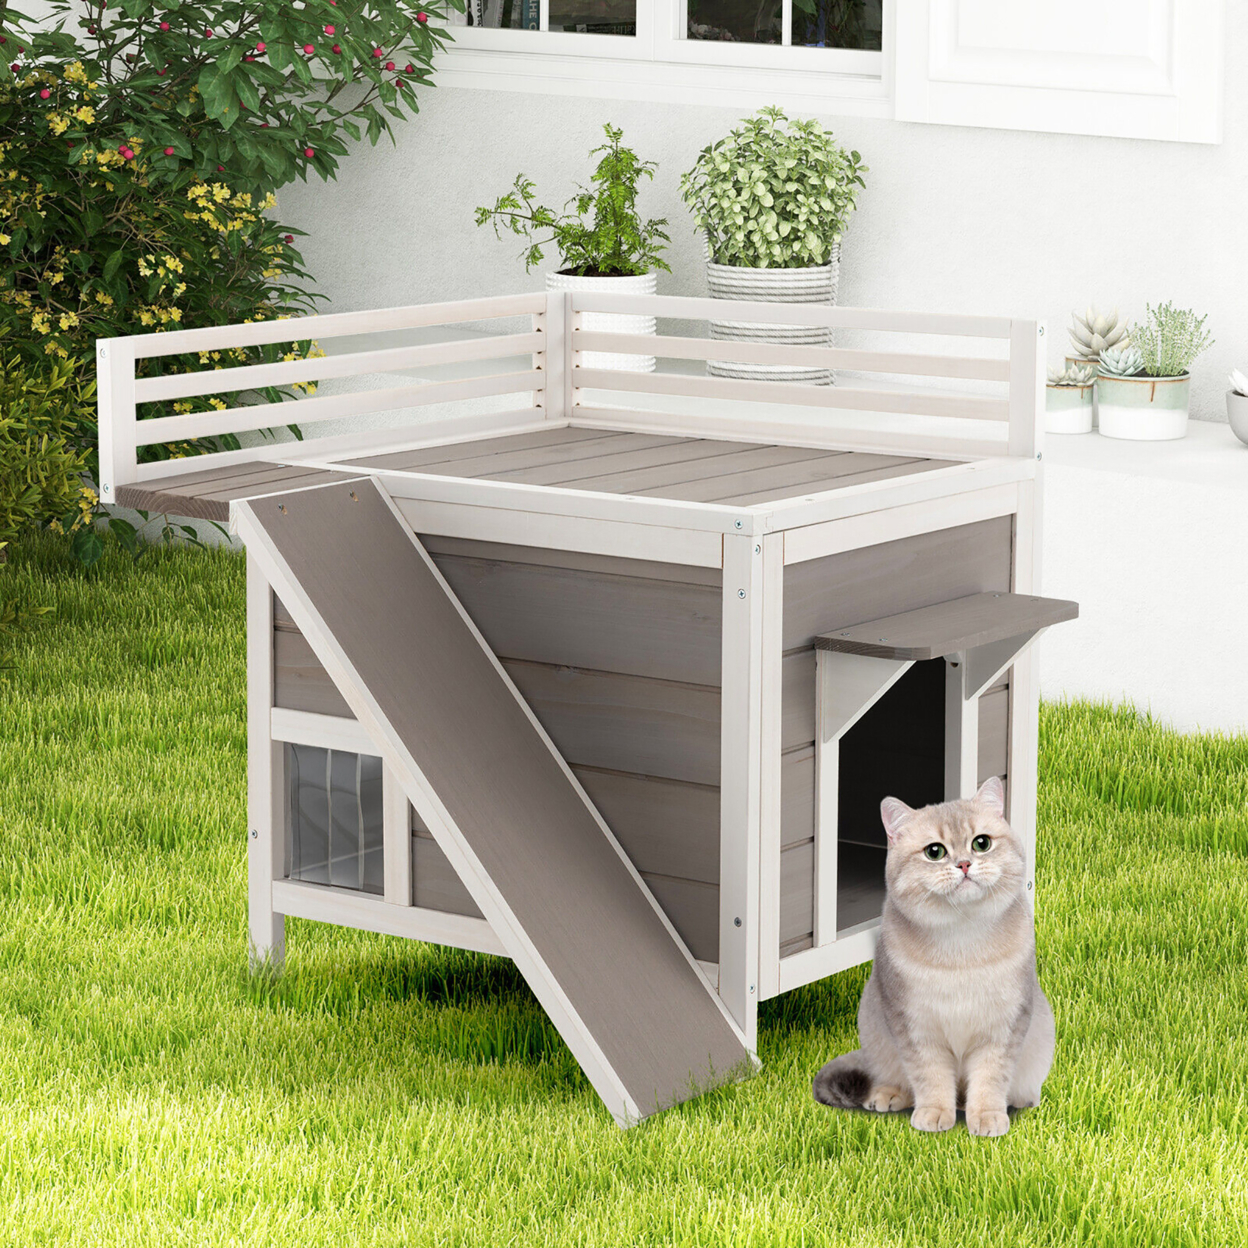 Outdoor Feral Cat House Wooden Kitty Shelter With Balcony & Slide